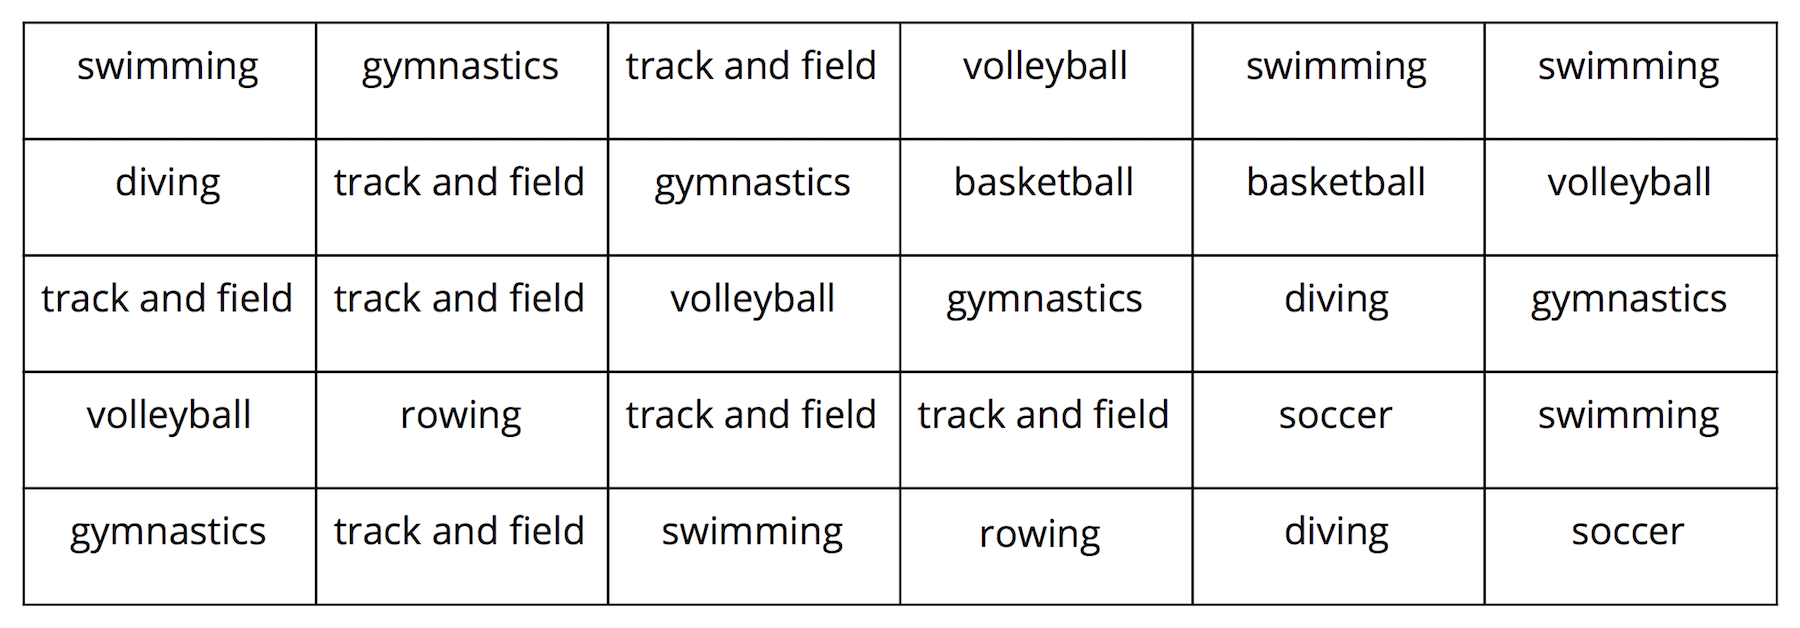 A 6-column table with 5 rows of data. the data are as follows: Row 1: swimming, gymnastics, track and field, volleyball, swimming, swimming. Row 2: diving, track and field, gymnastics, basketball, basketball, volleyball. Row 3: track and field, track and field, volleyball, gymnastics, diving, gymnastics. Row 4: volleyball, rowing, track and field, track and field, soccer, swimming. Row 5: gymnastics, track and field, swimming, rowing, diving, soccer